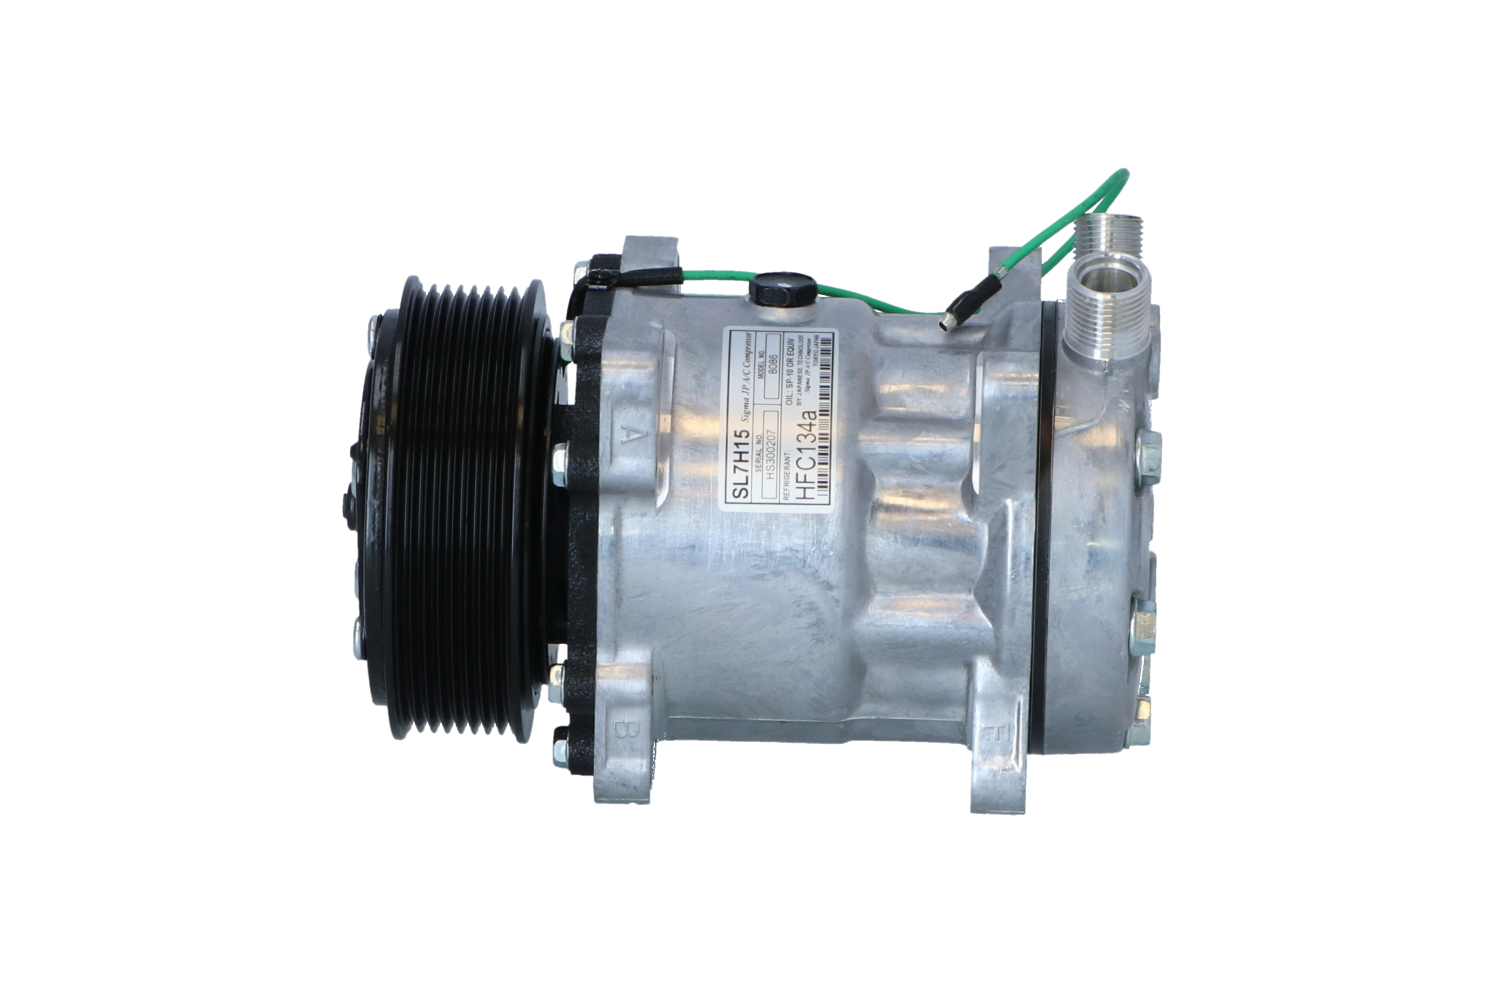 NRF 32770 Air conditioning compressor SD7H15, 24V, PAG 46, with PAG compressor oil, with seal ring, EASY FIT